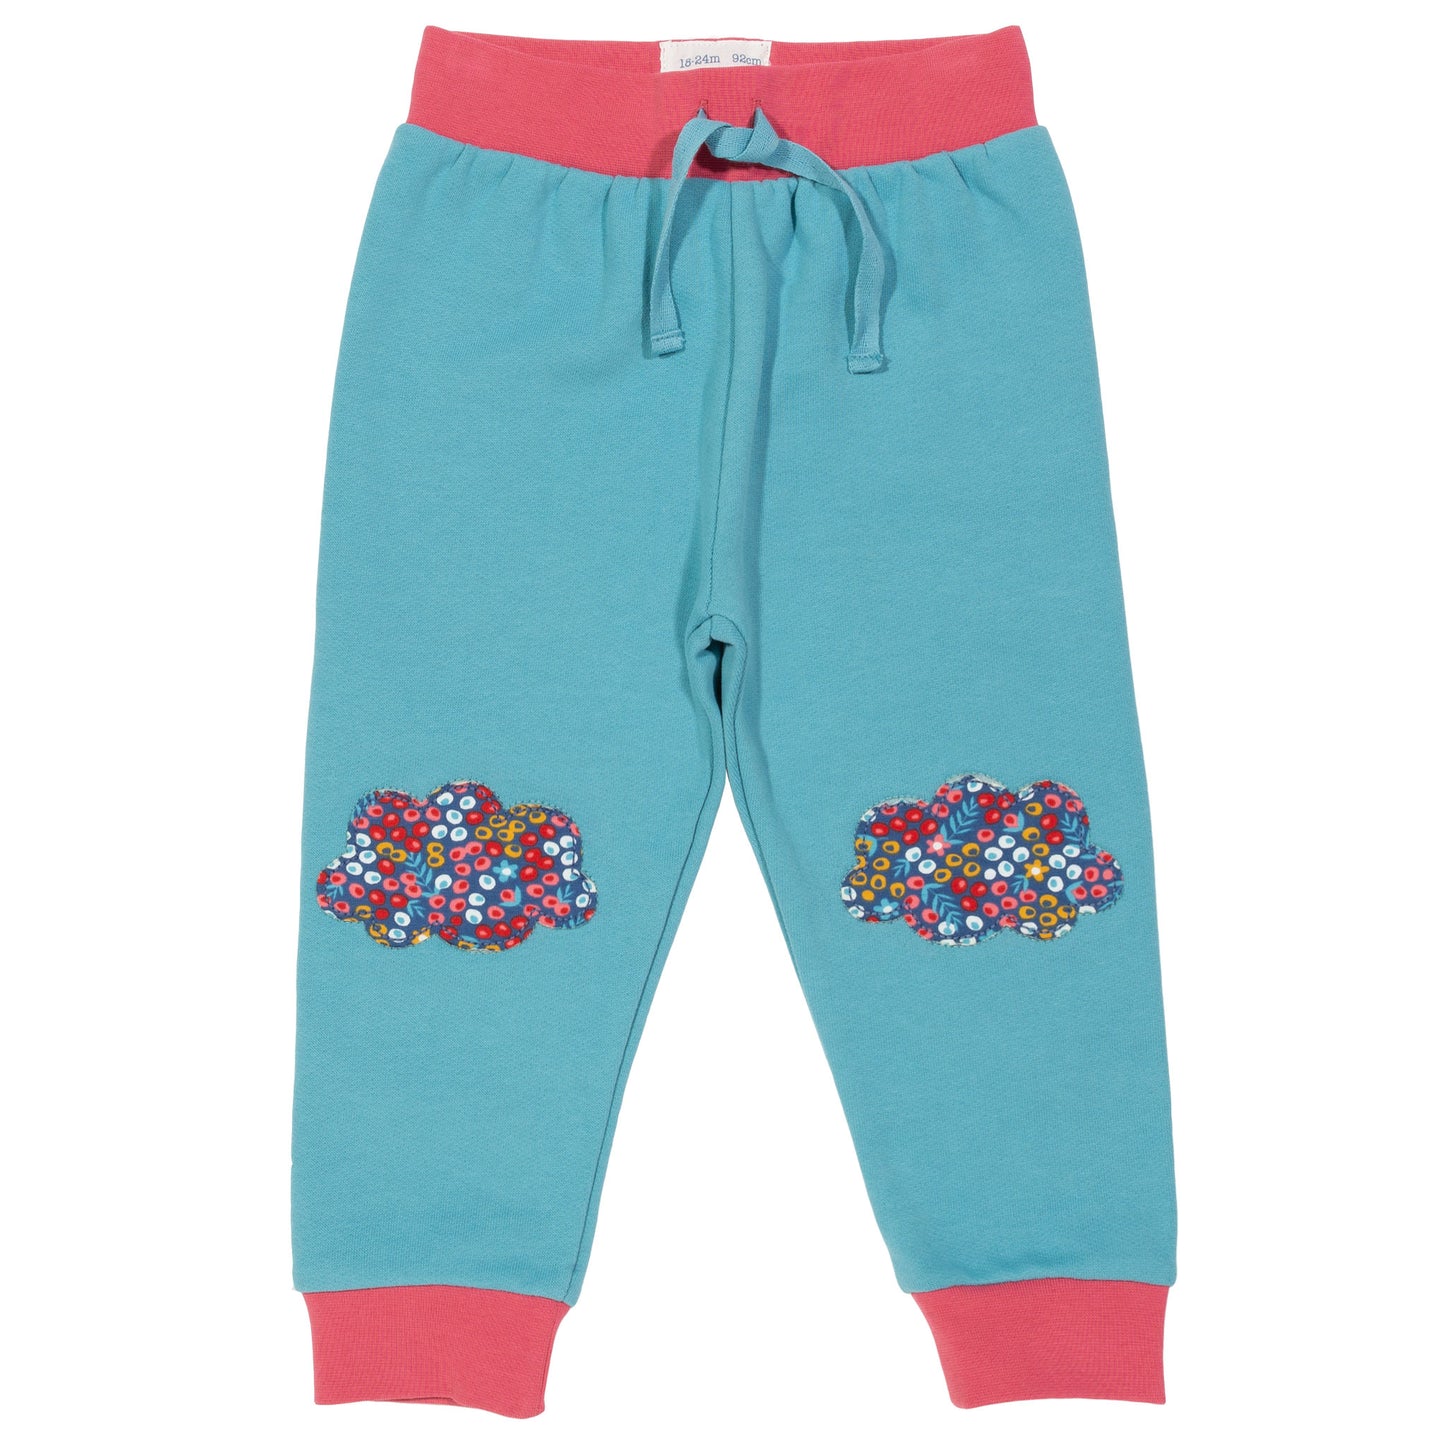 Berry ditsy joggers